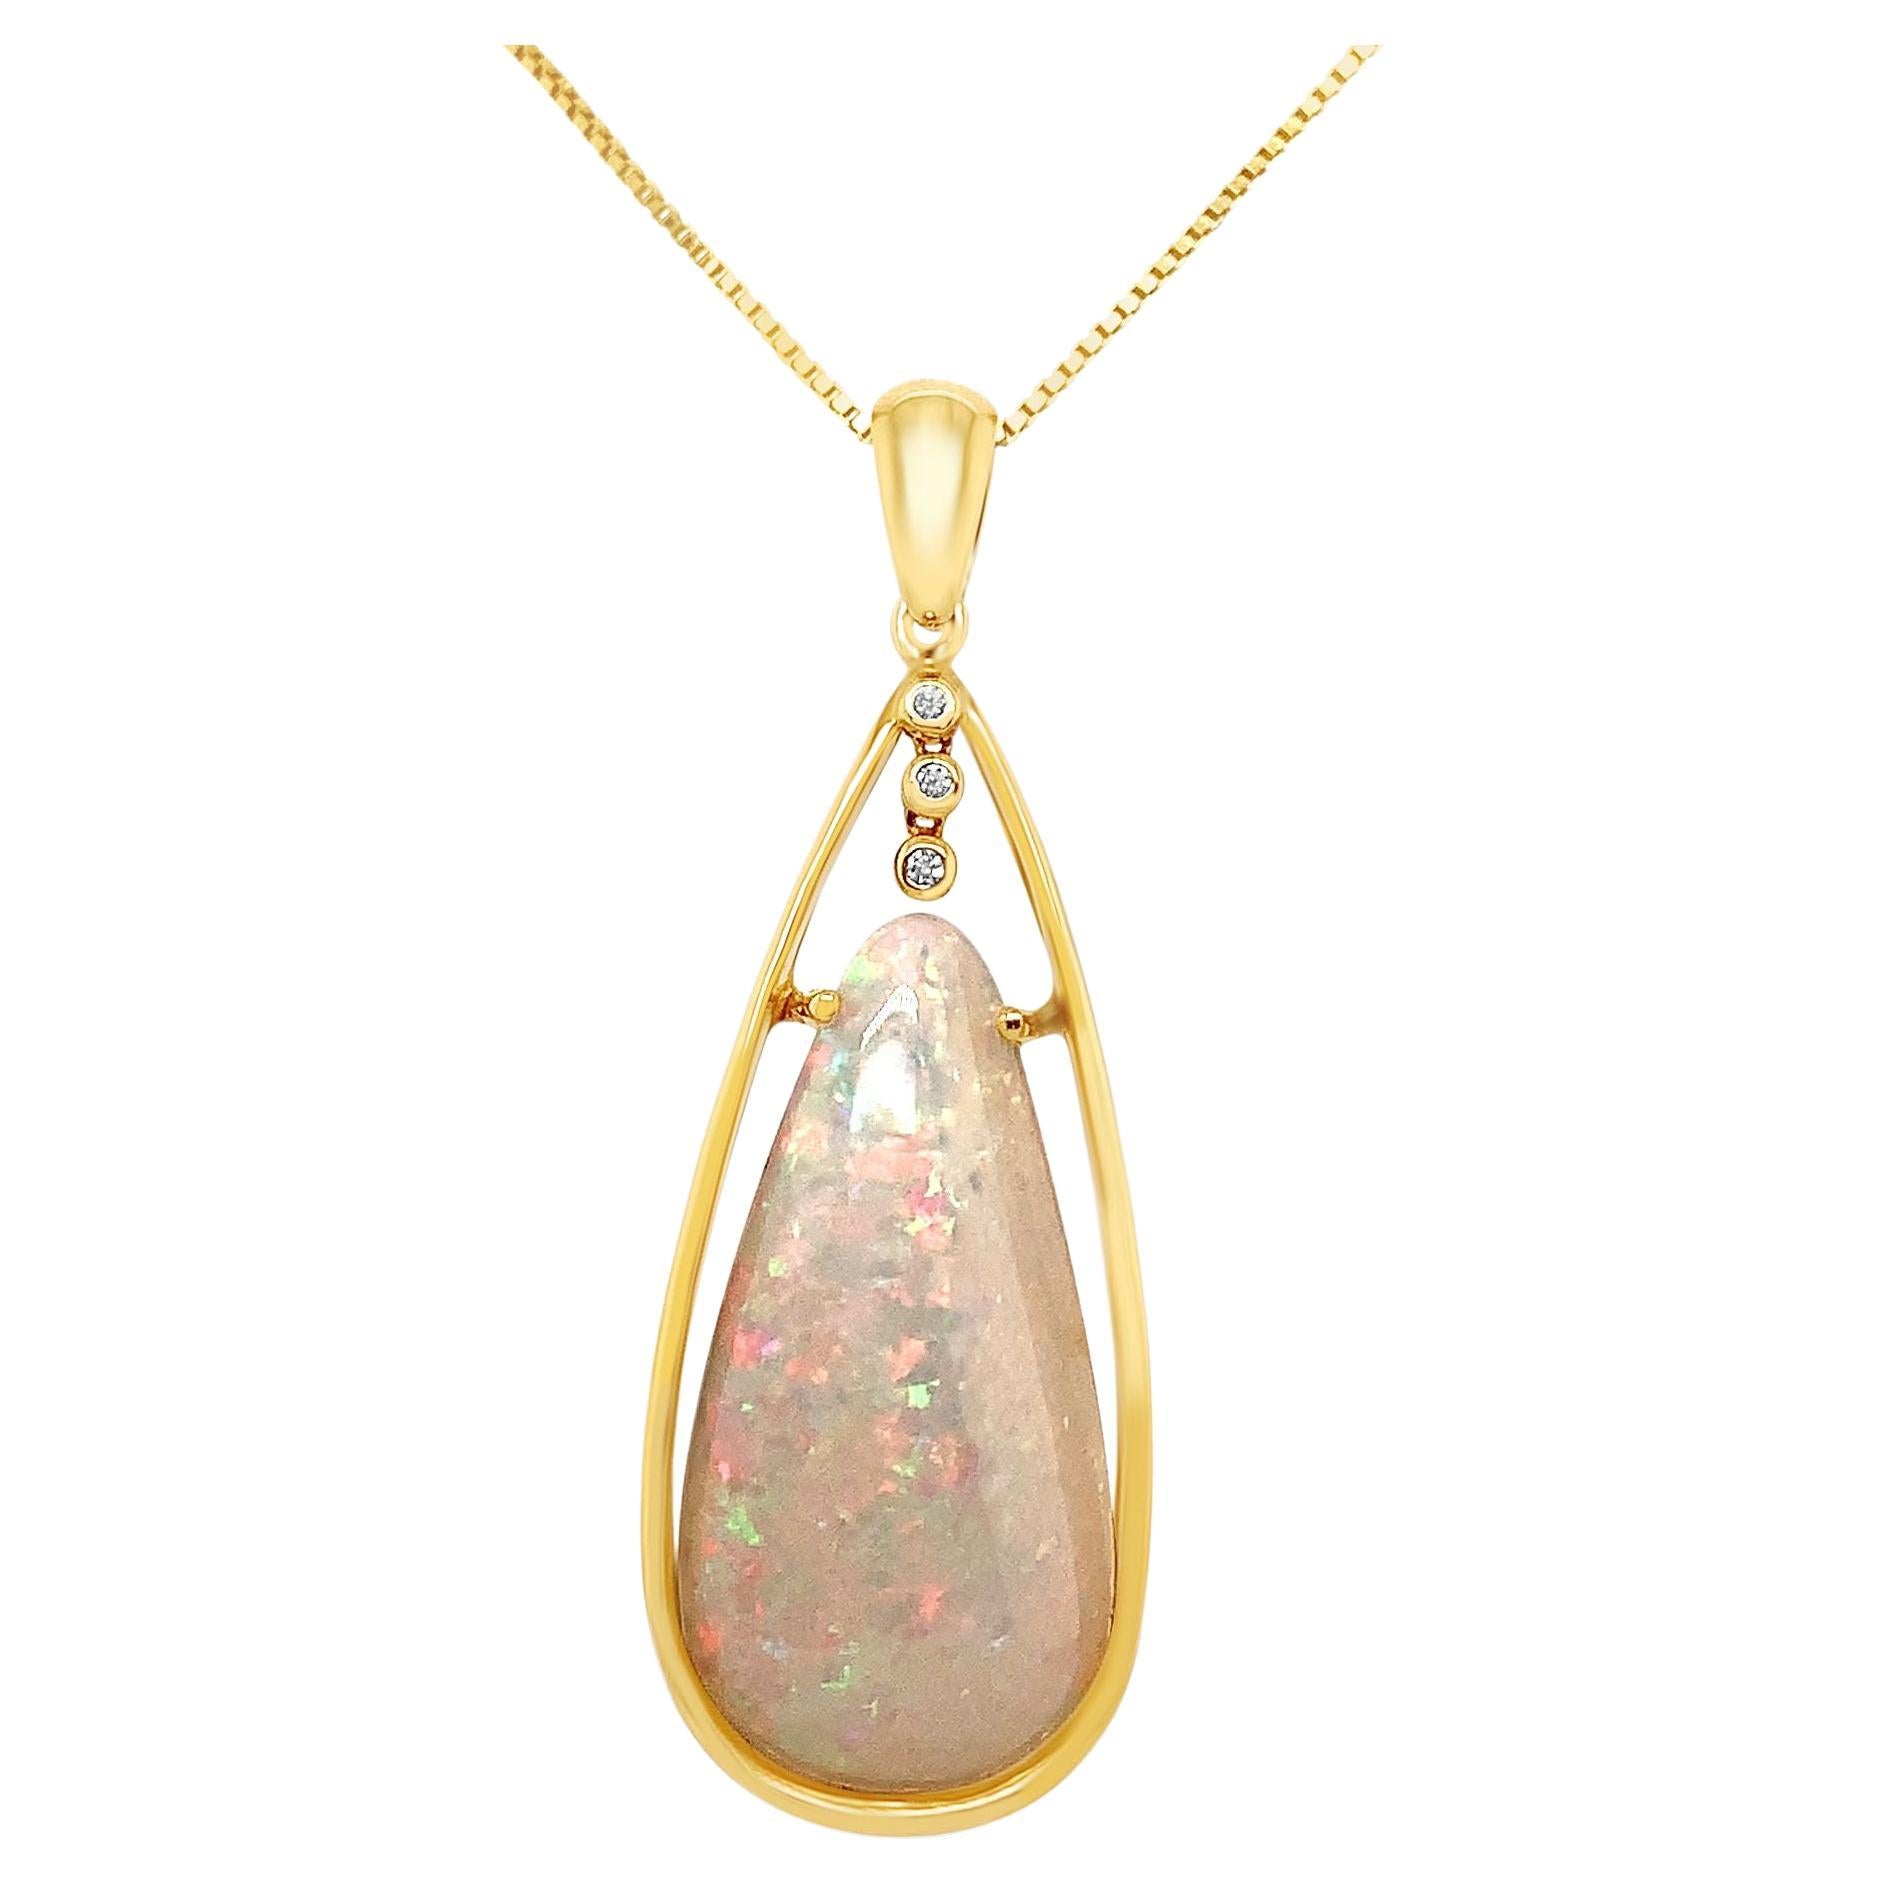 Natural Australian 20.18ct Boulder Opal Pendant Necklace in 18K Yellow Gold